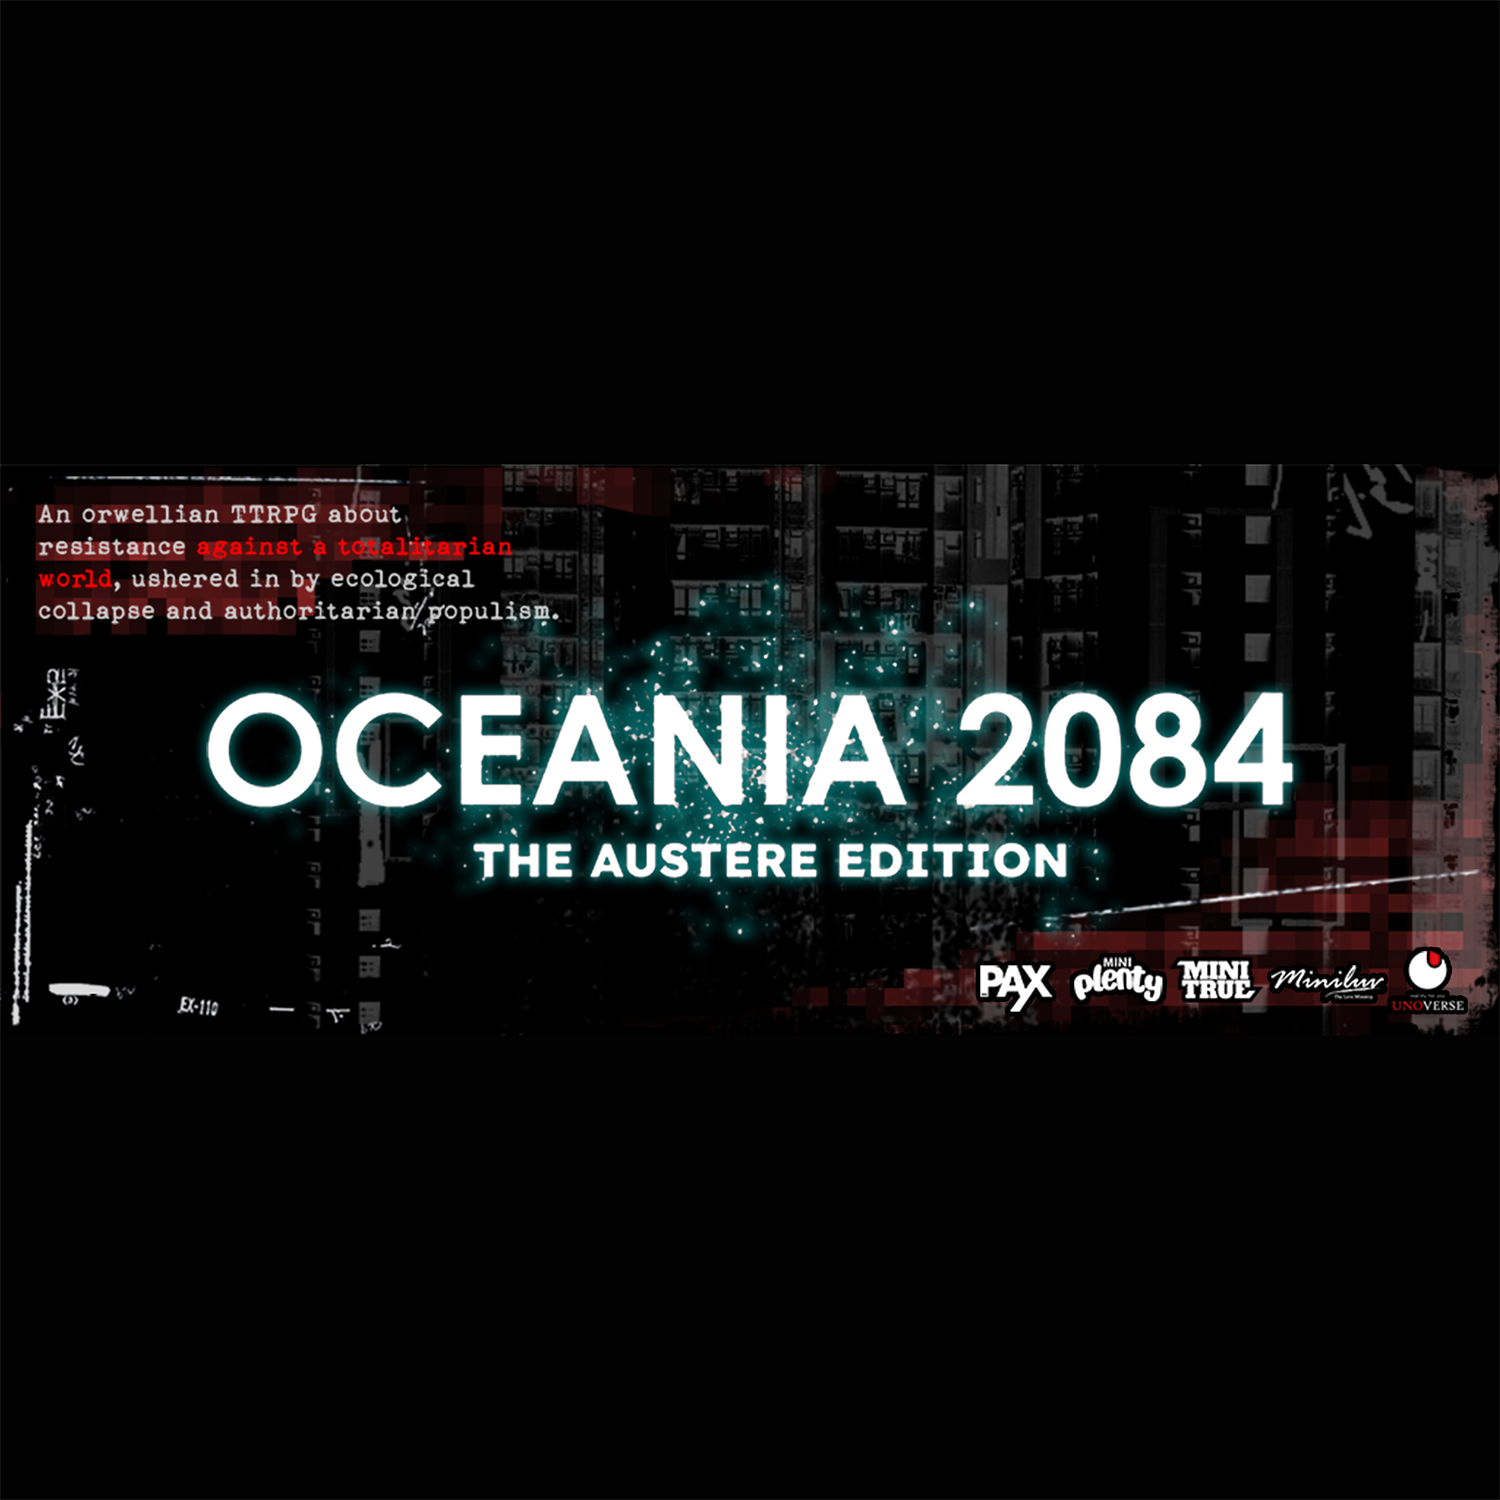 Dystopian background, text: Oceania 2084. Austere Edition. An orwellian TTRPG about resistance against a totalitarian world, ushered in by ecological collapse and autoritarian populism.